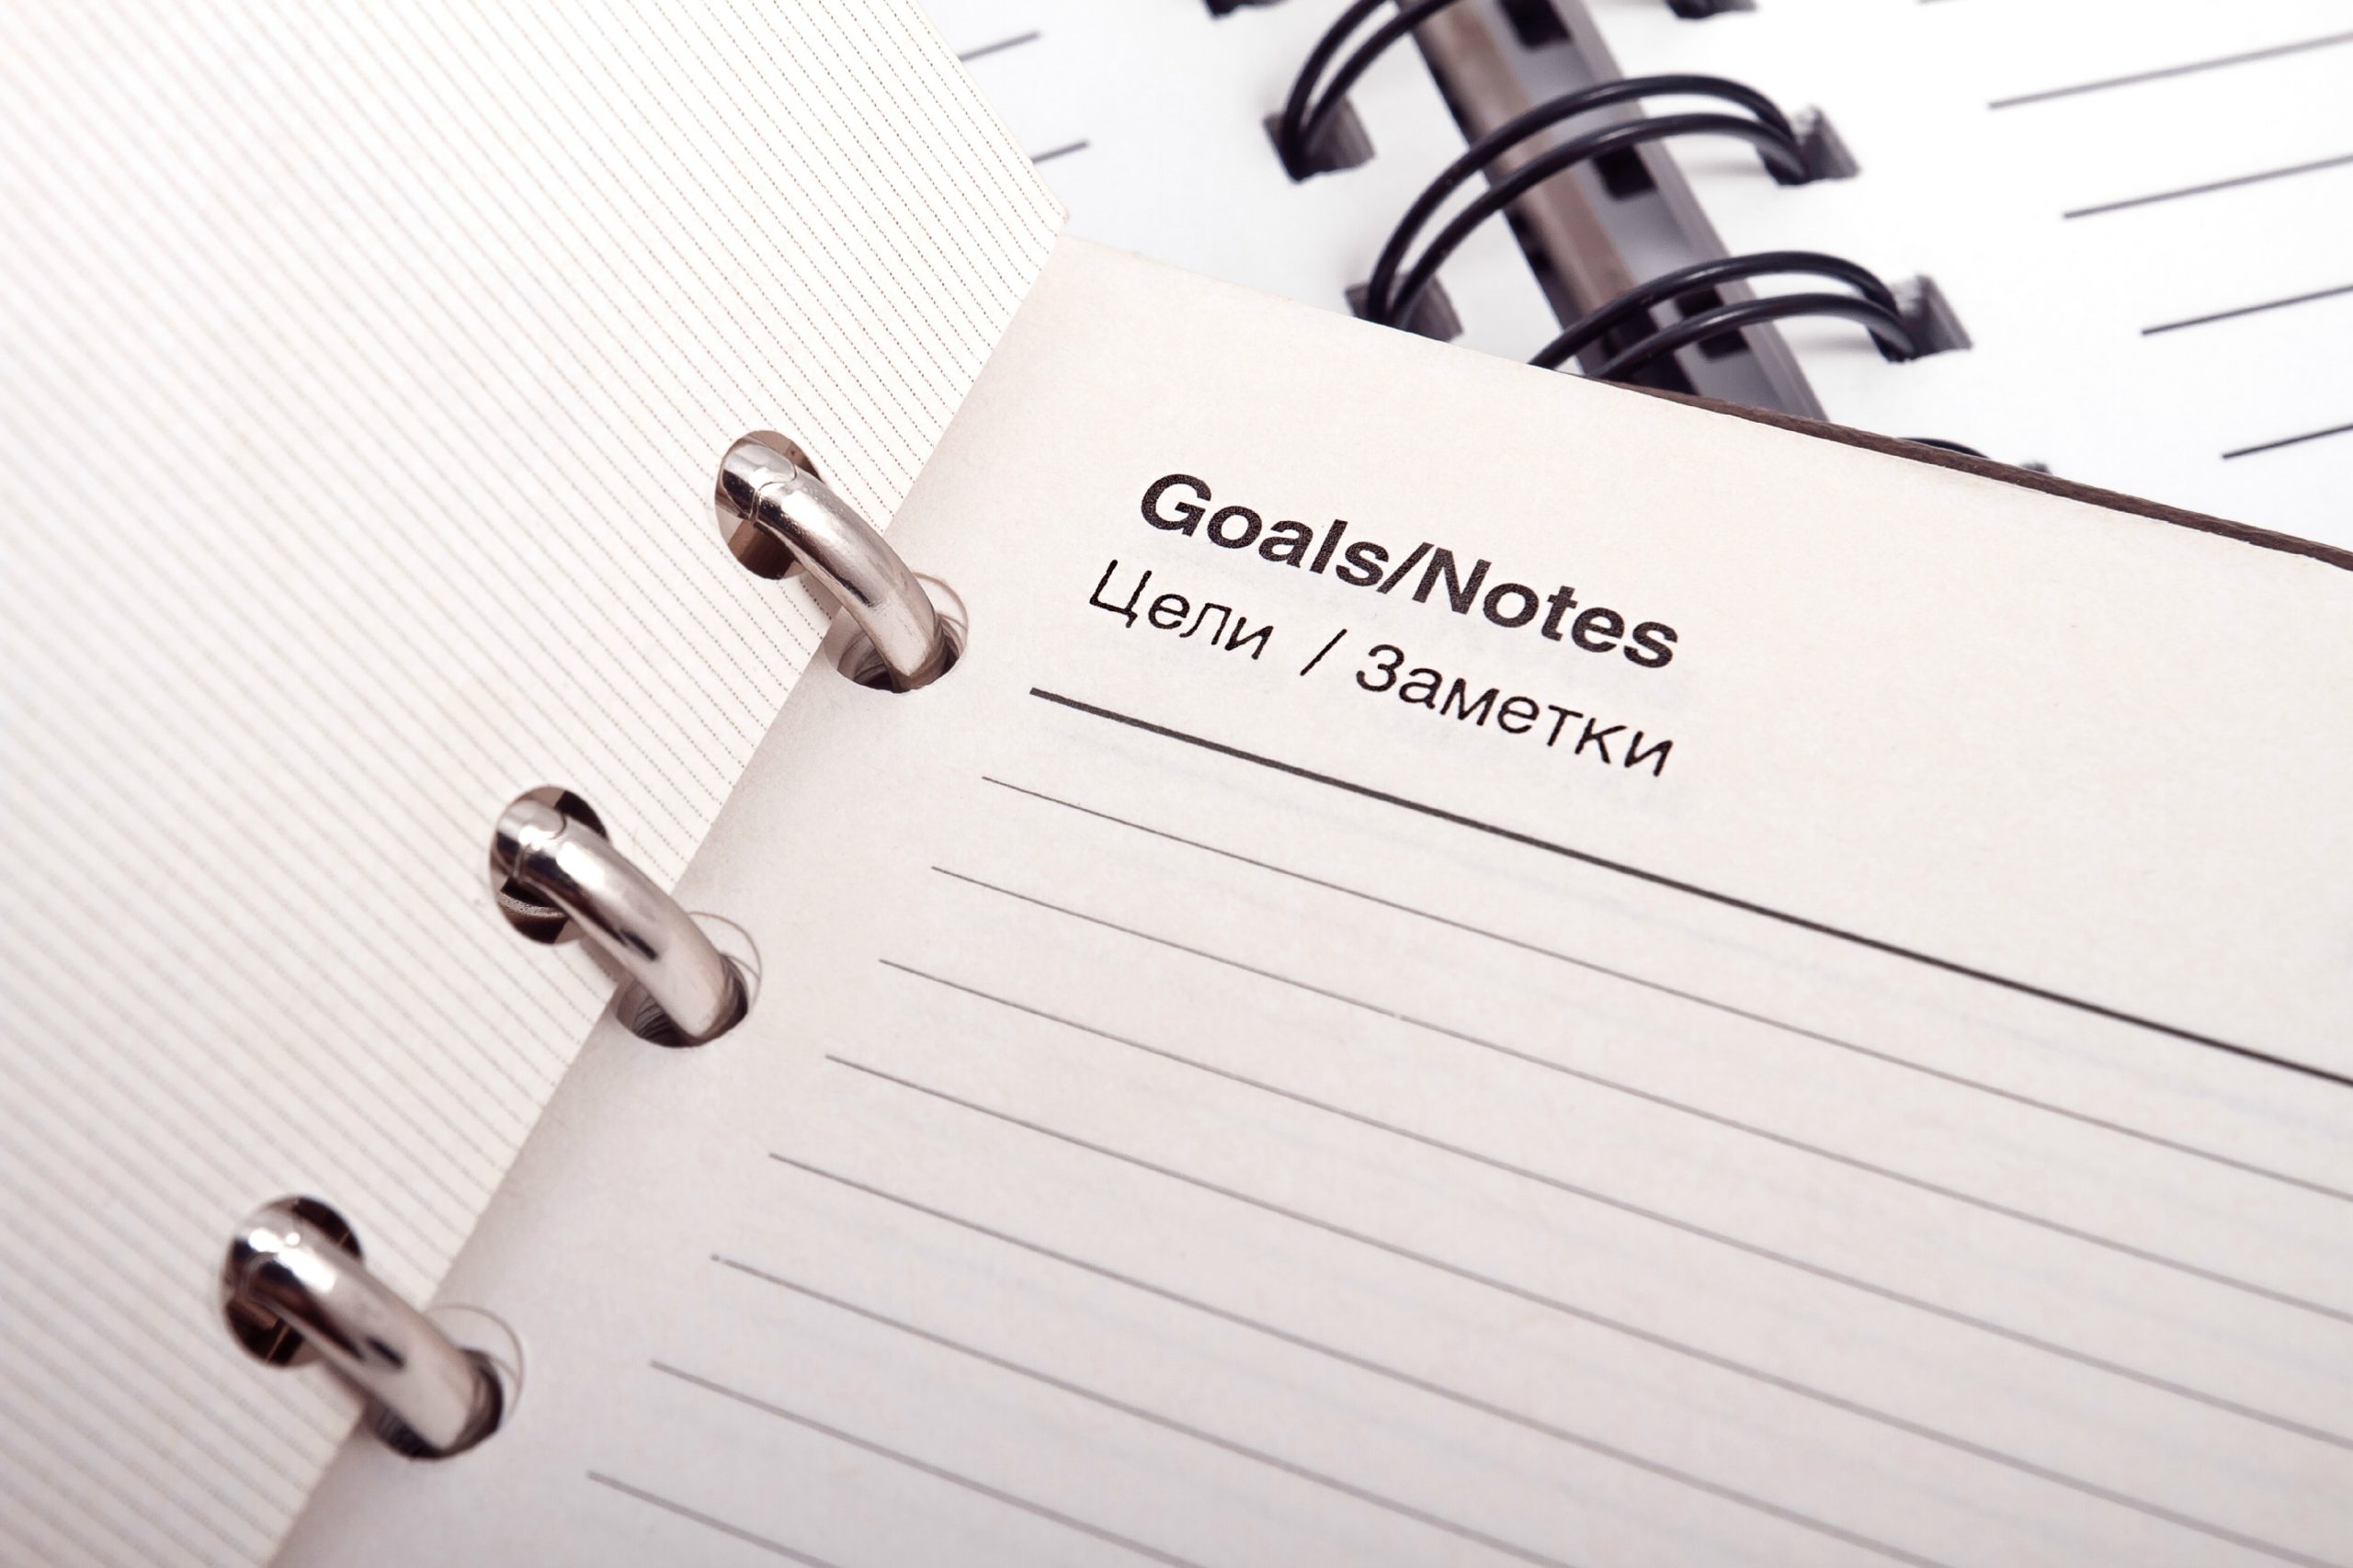 Are you setting reasonable business goals?